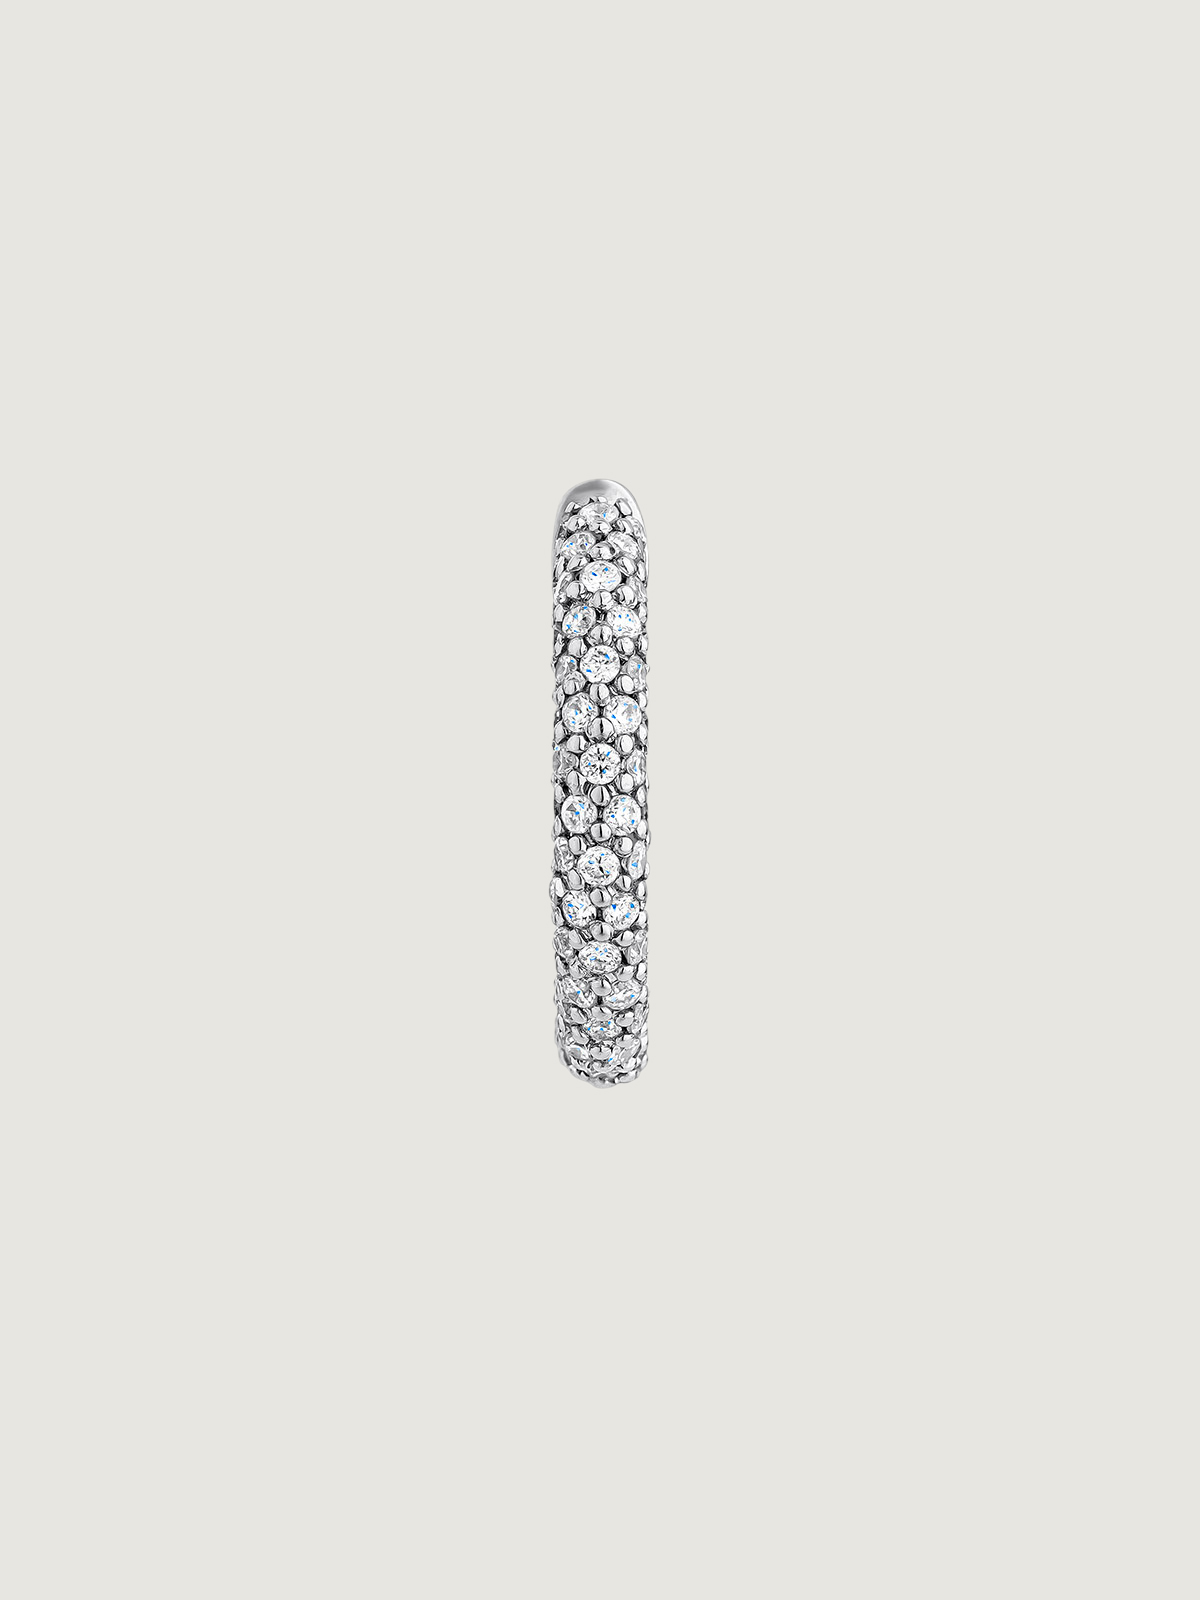 Individual 18K white gold hoop earring with diamonds